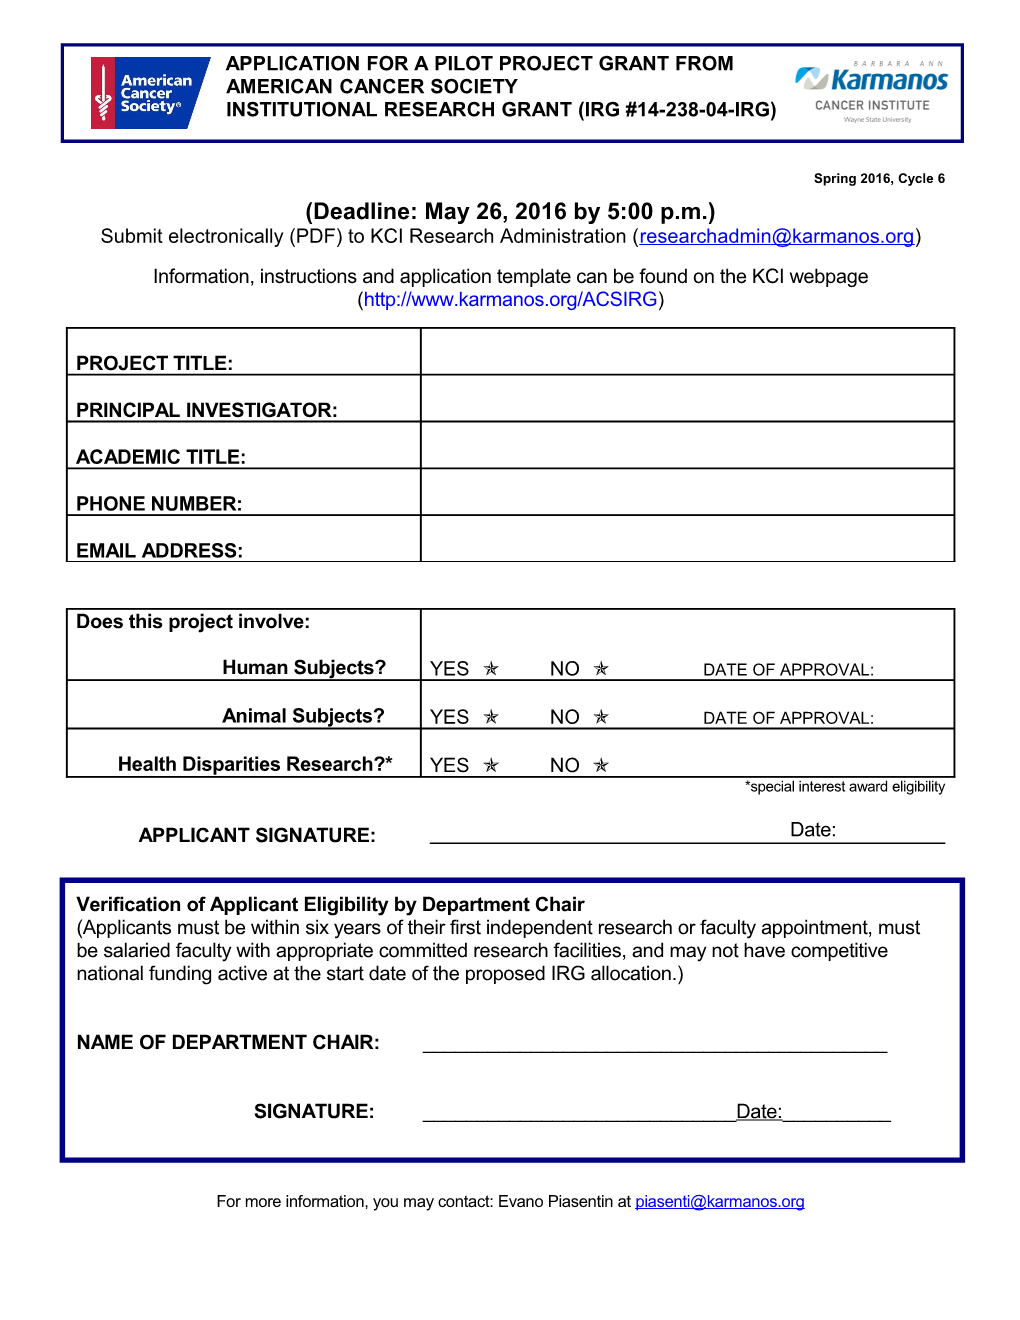 American Cancer Society IRG Forms Forms